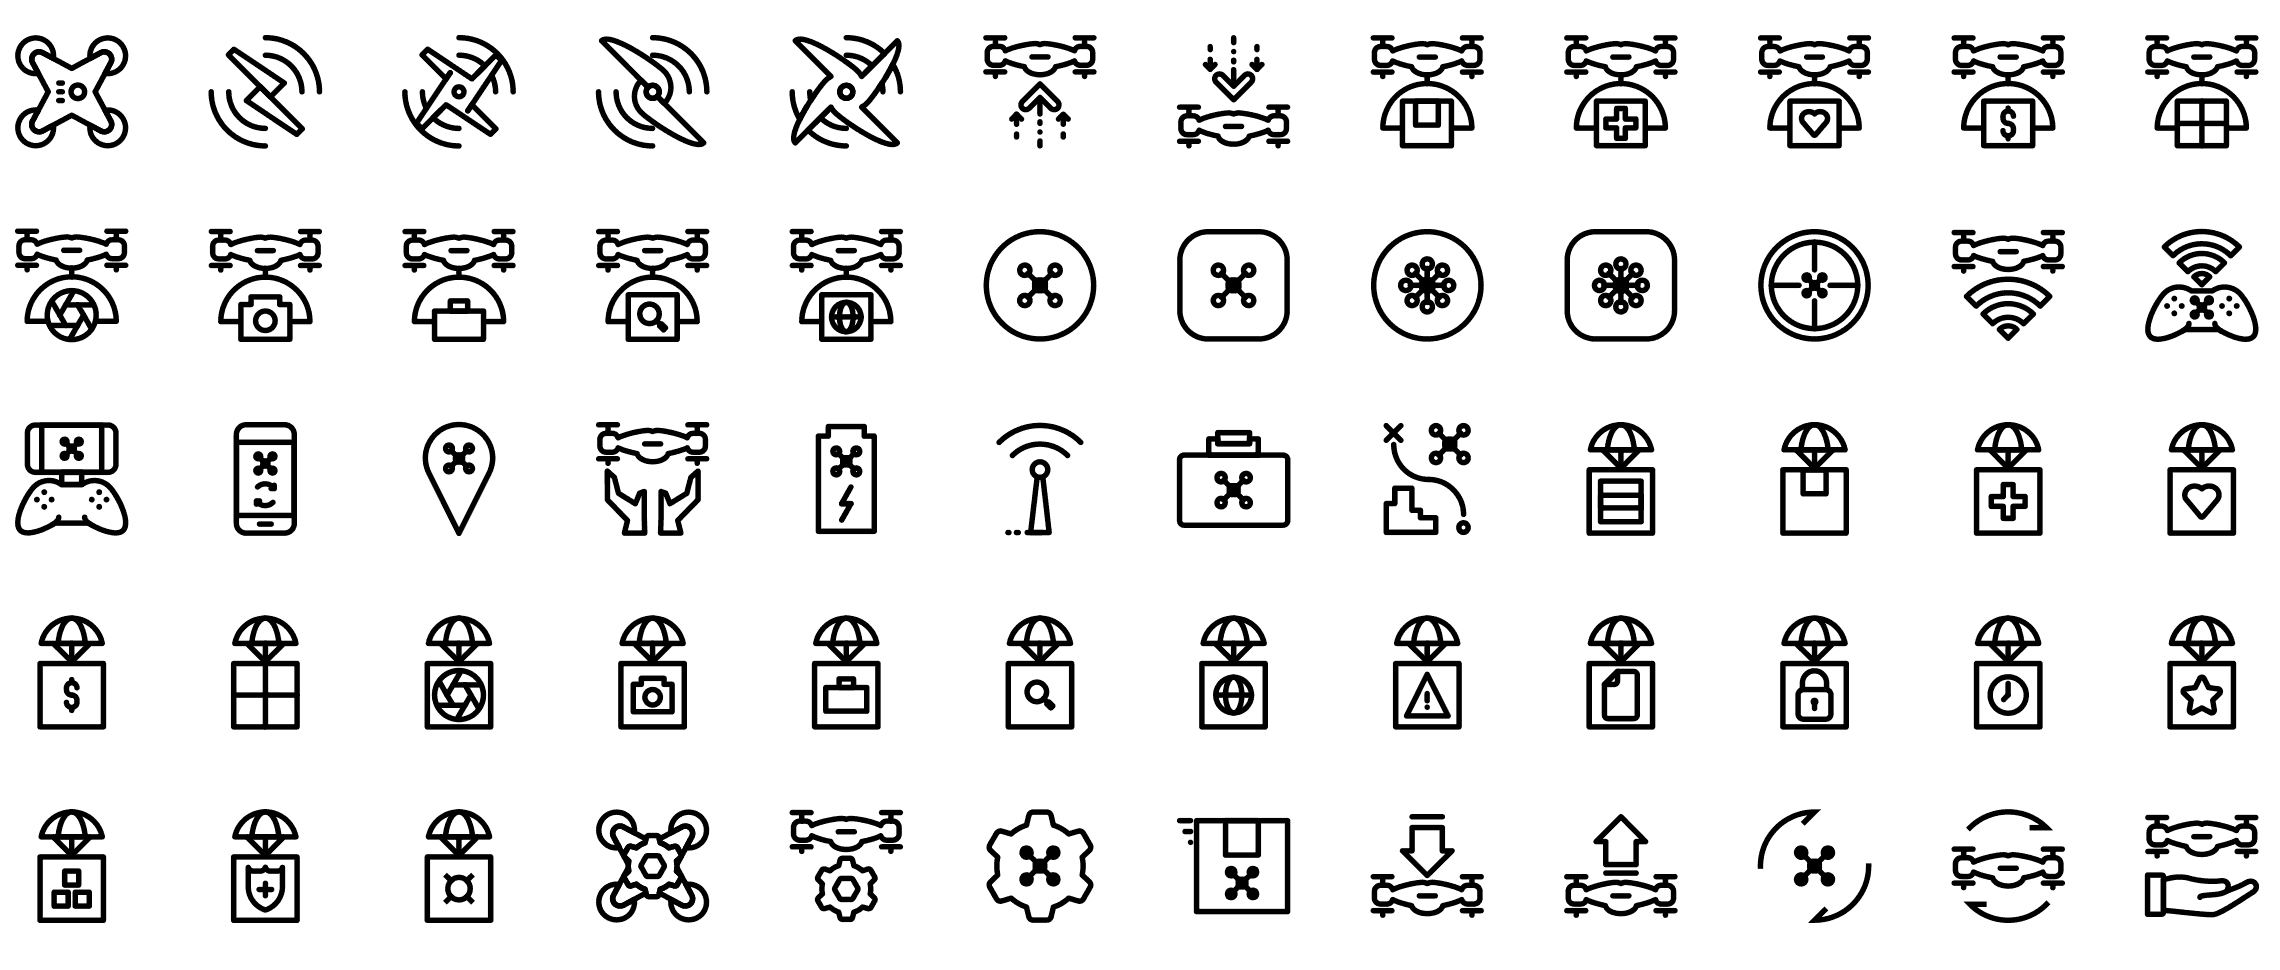 drones-line-icons-preview